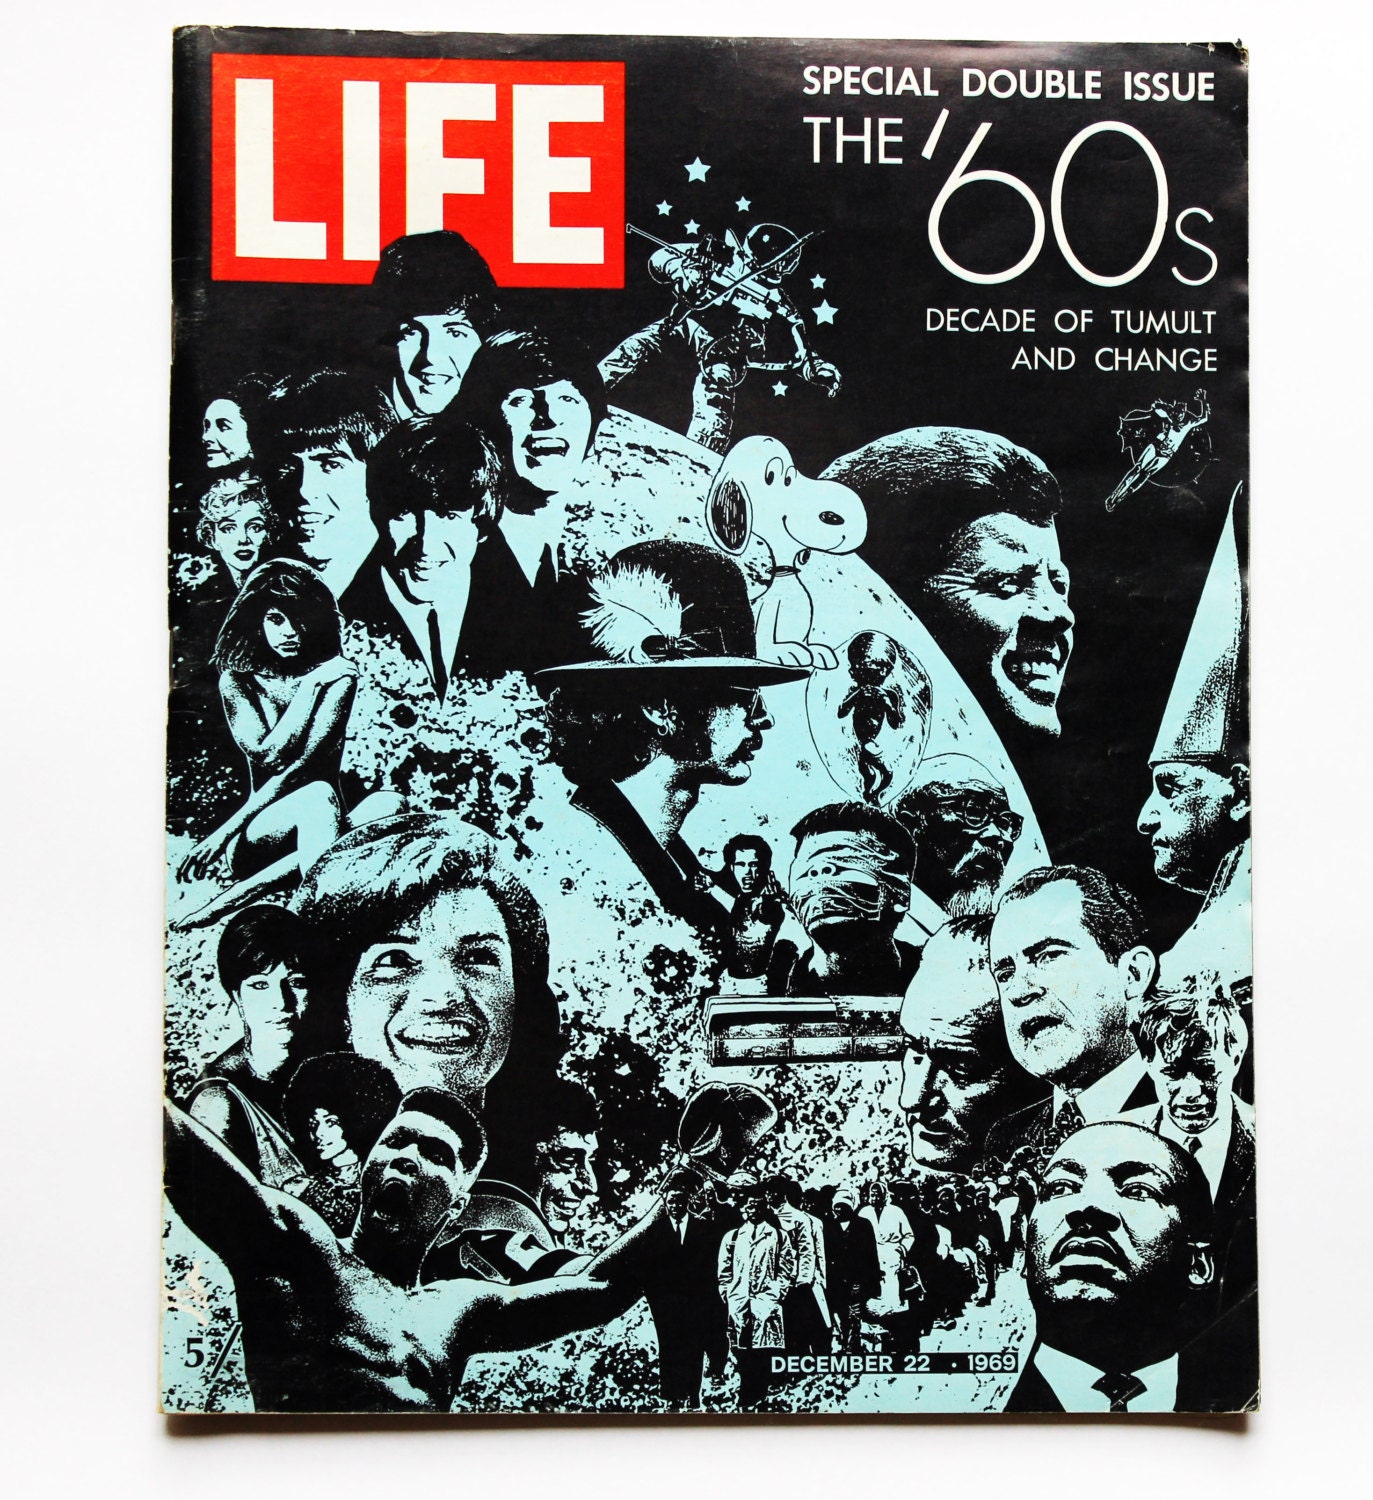 LIFE MAGAZINE December 26 1969 Special Double Issue: the